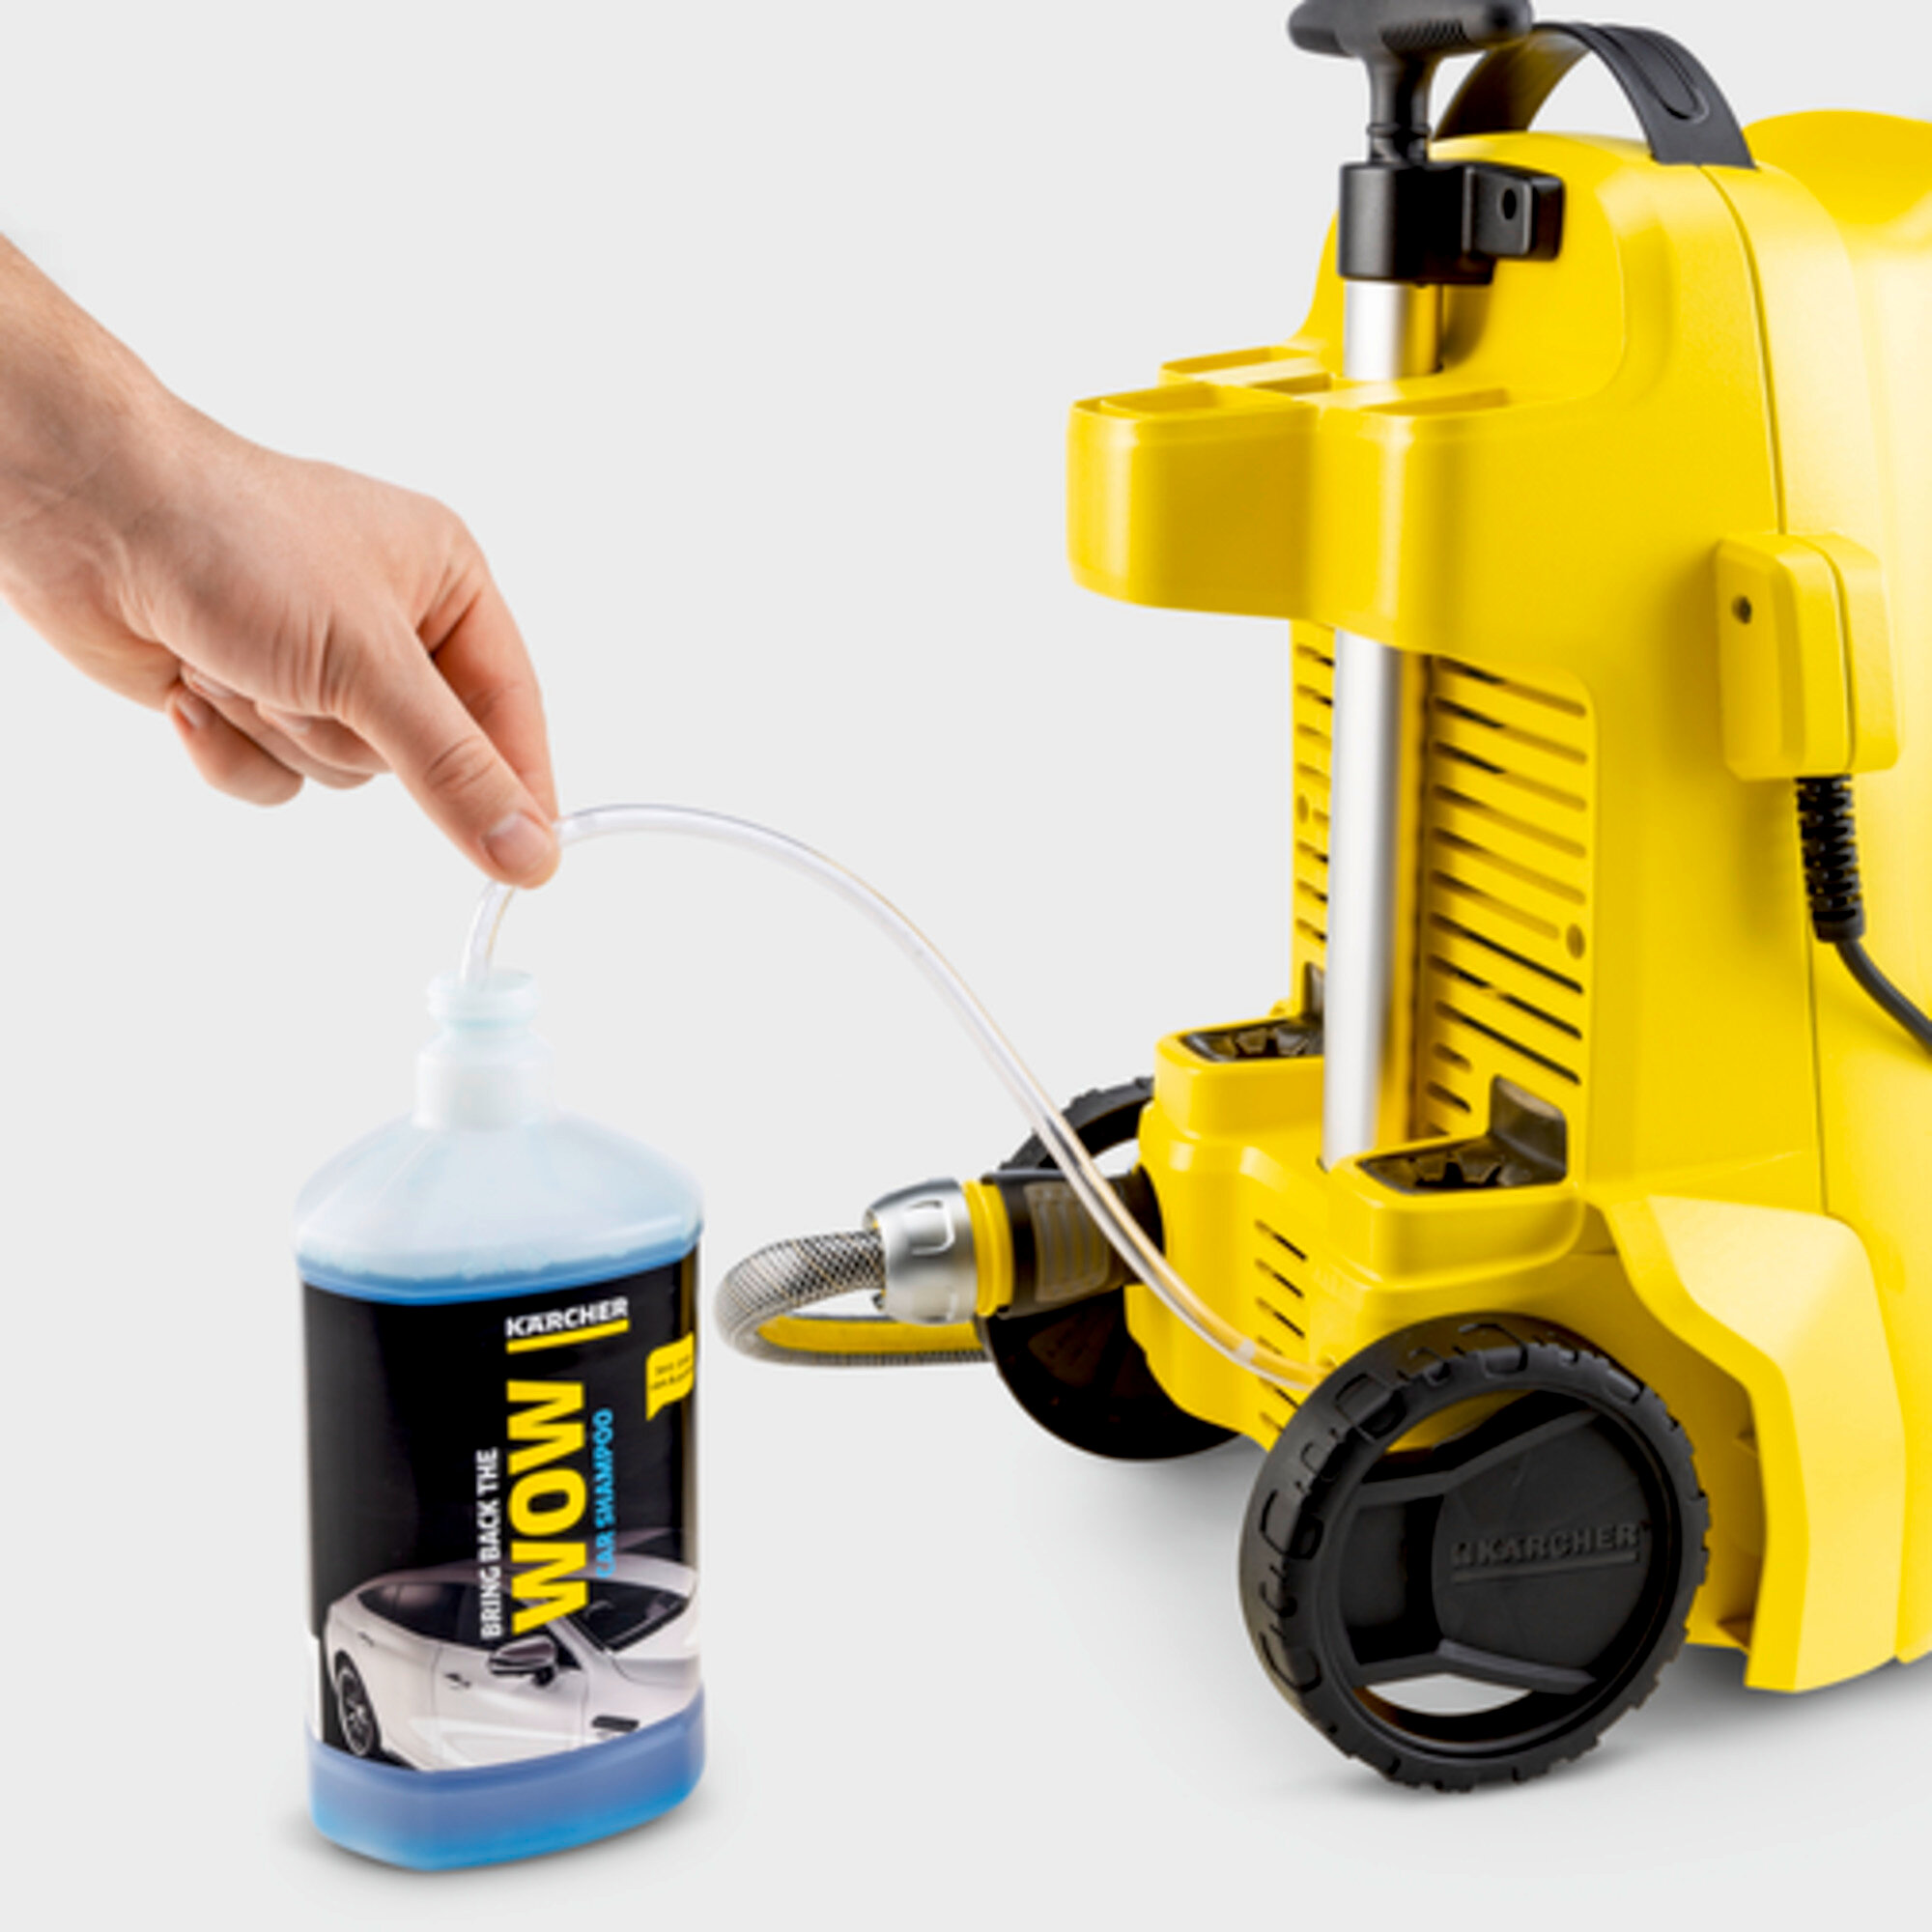 High pressure washer K 3 Compact: Detergent use